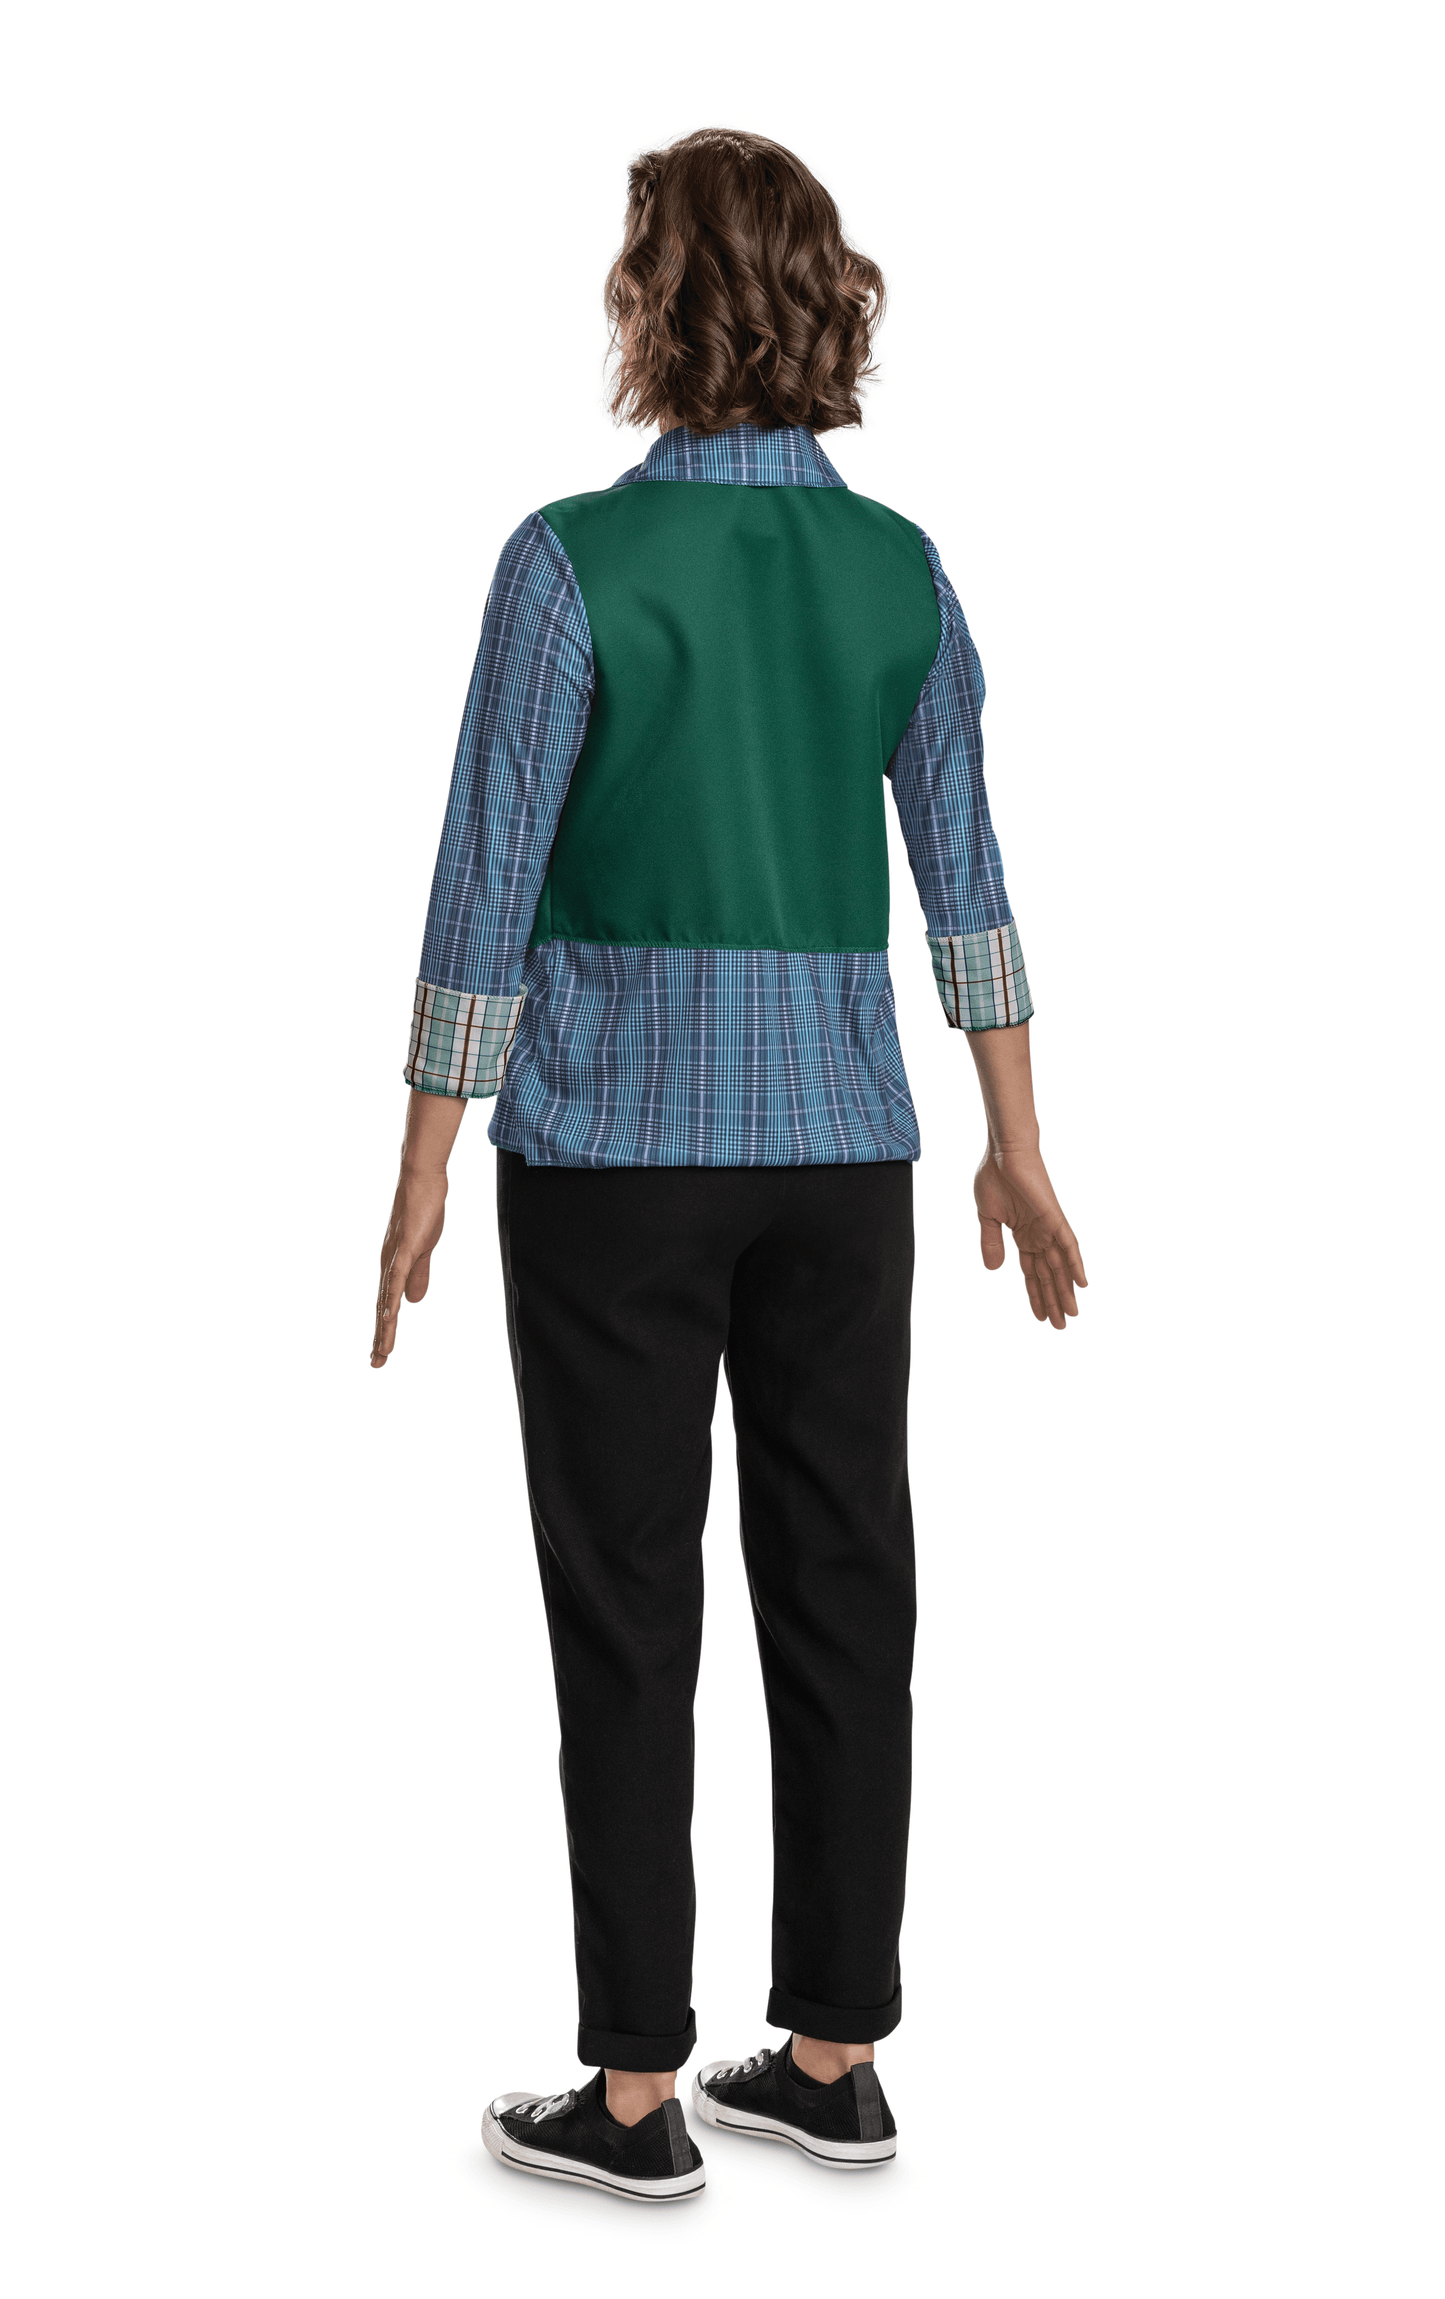 Adult Robin Strangers Things 4 Deluxe Costume - McCabe's Costumes